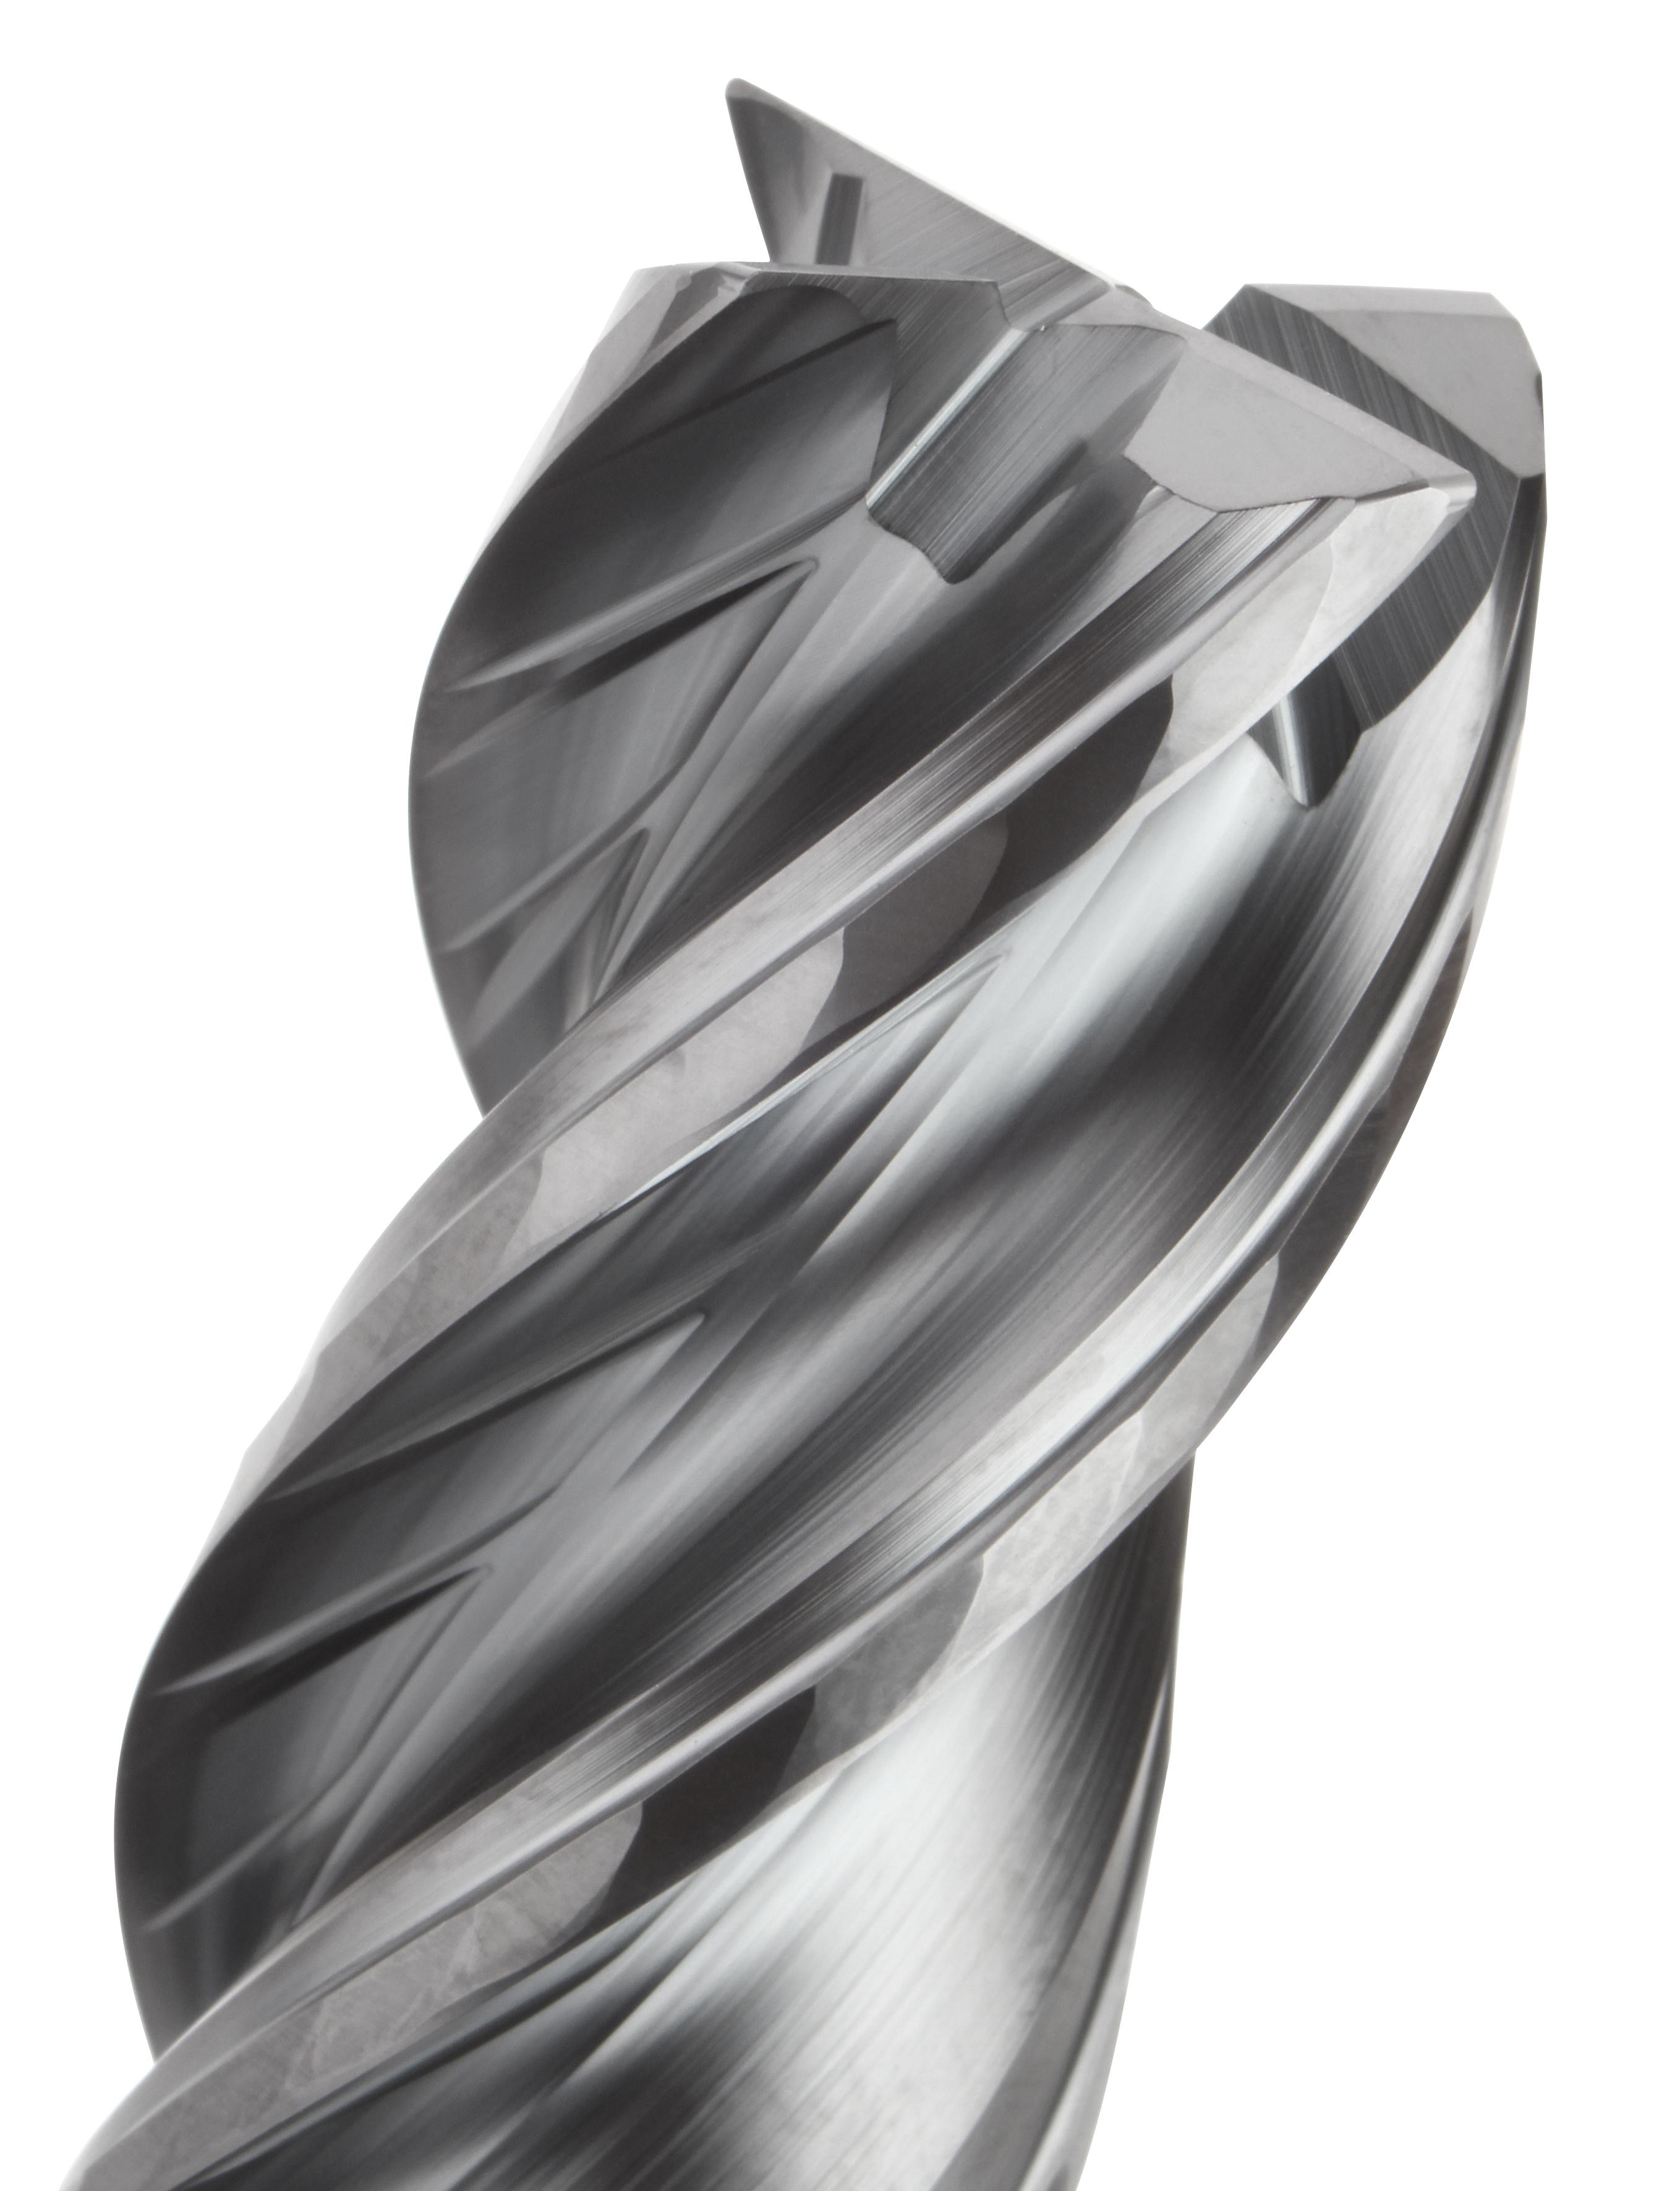 In addition to the HARVI I TE end mill shown here, Kennametal offers the multi-fluted RSM series, the “full ceramic” EADE capable of very high sfm, and the HARVI III, said to have a geometry suited for high-temp alloys. (Image courtesy of Kennametal)